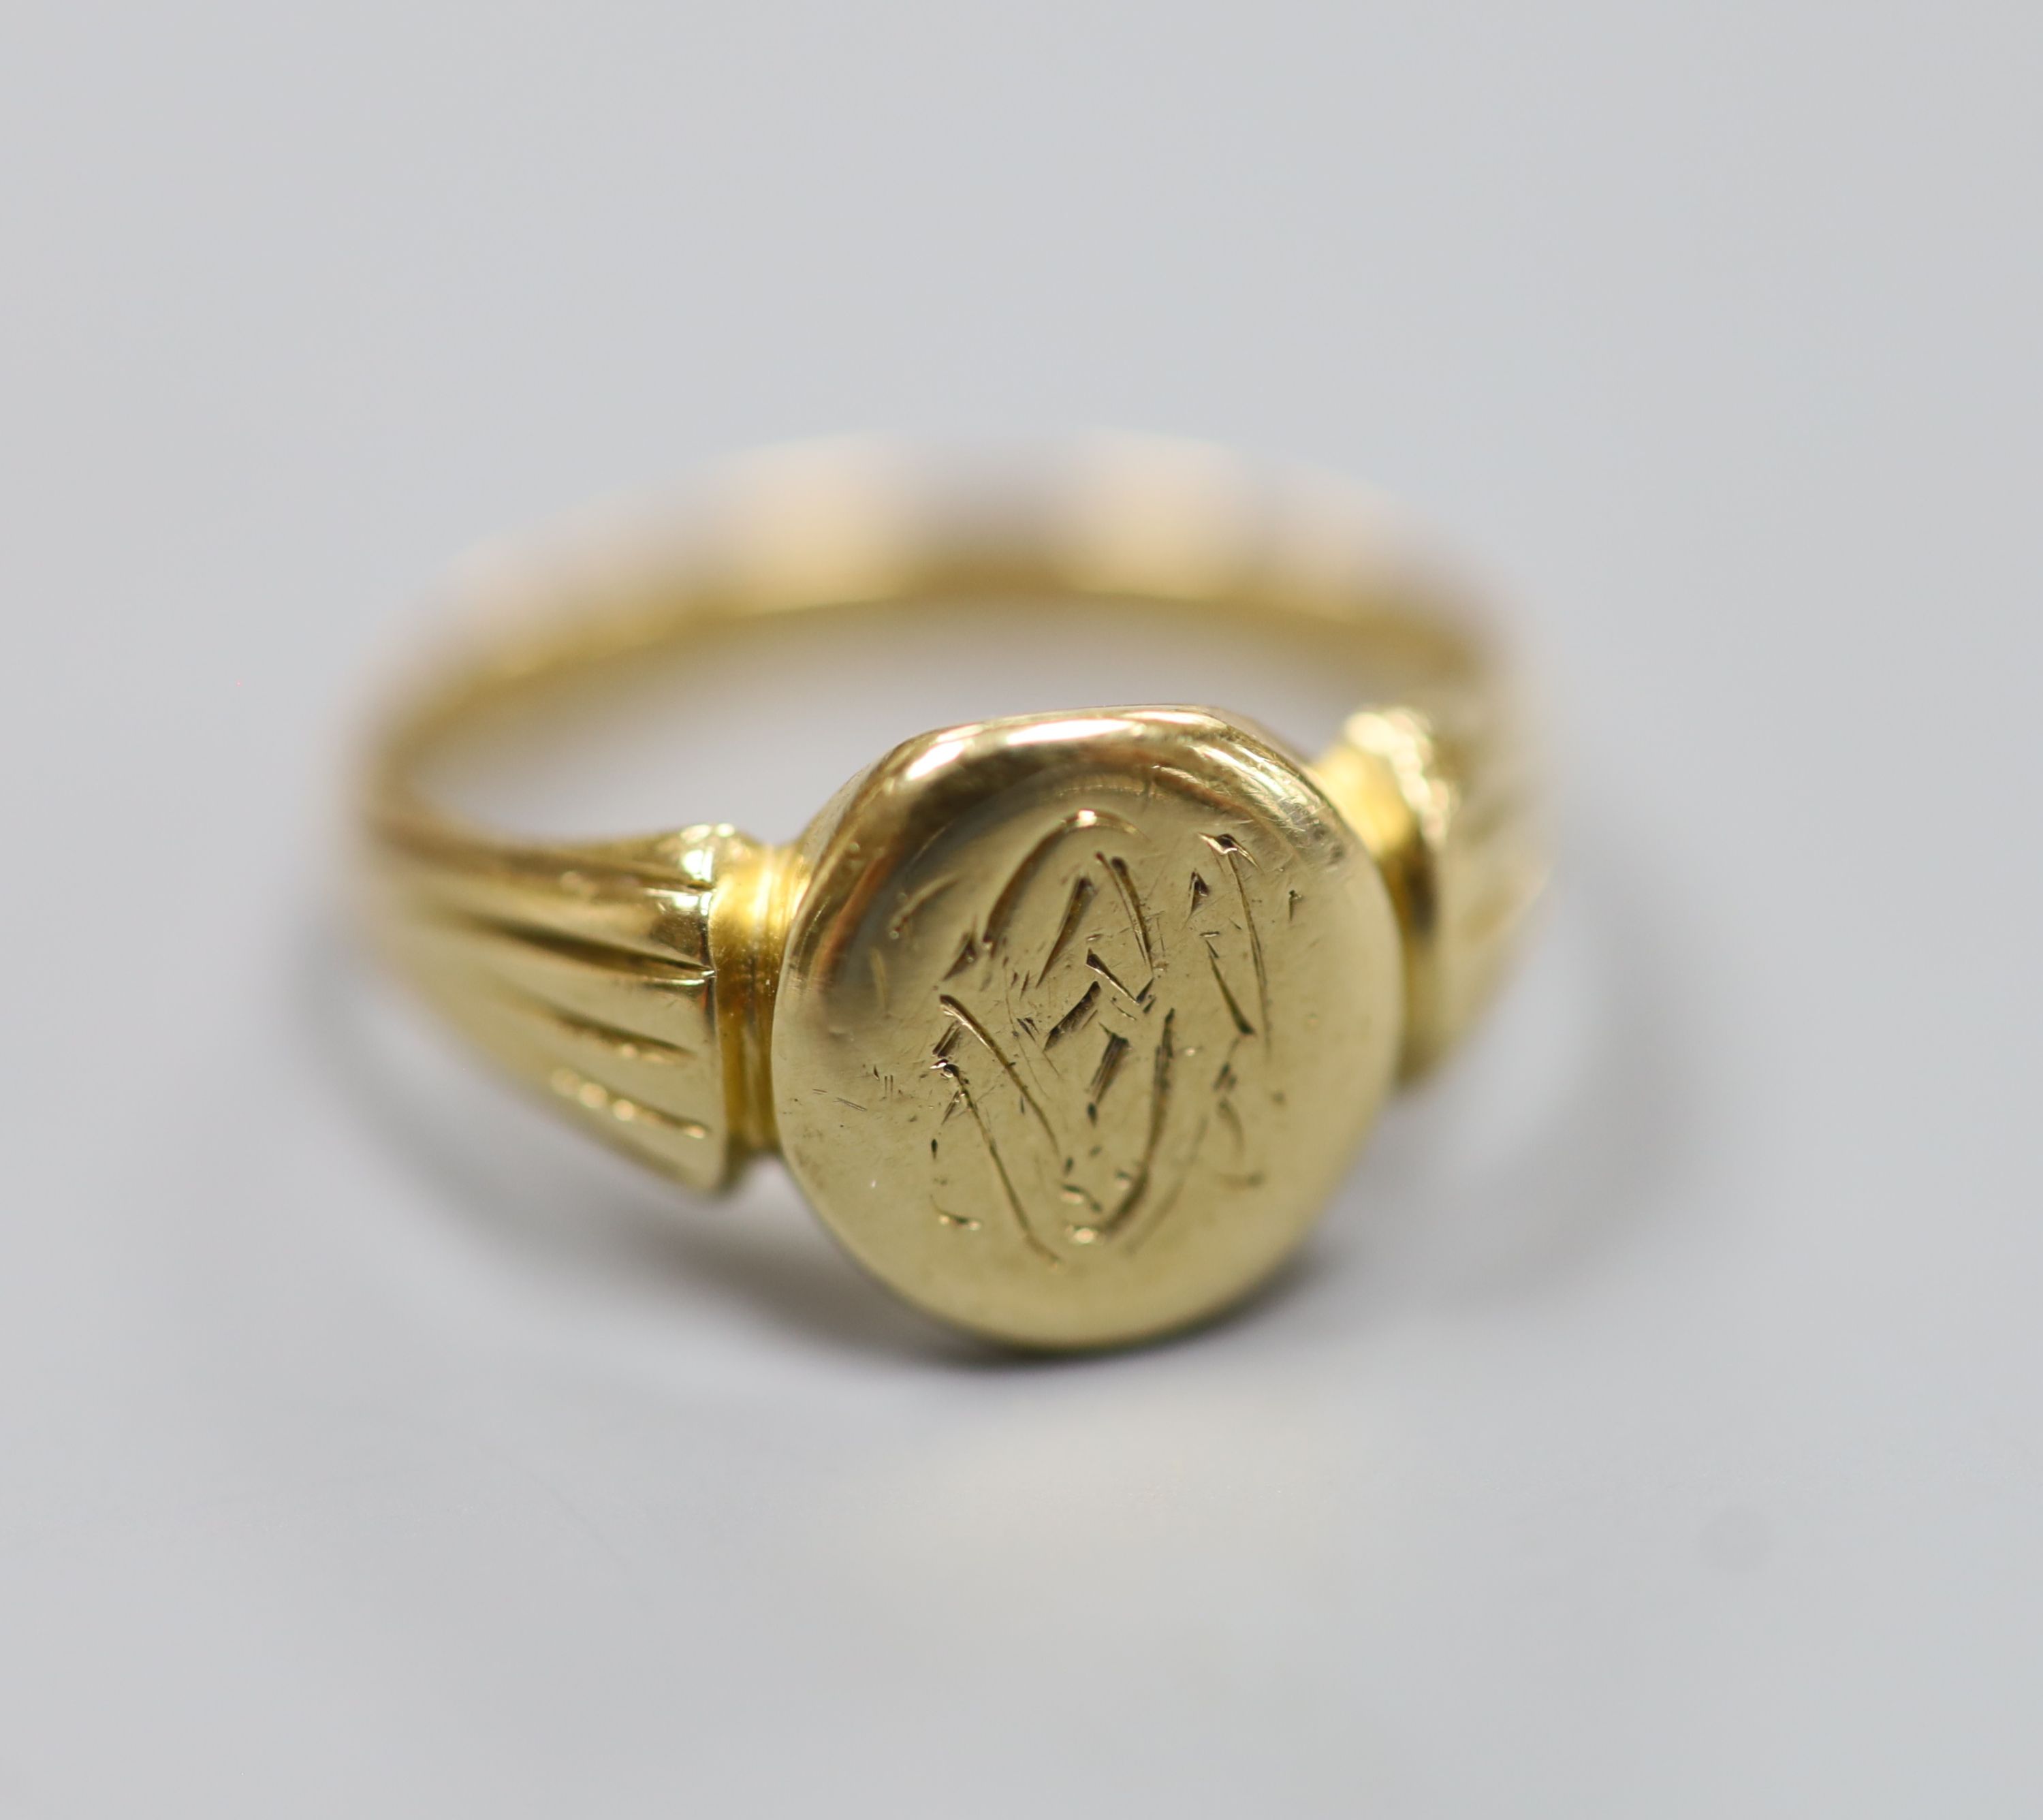 A late Victorian 18ct gold signet ring with engraved crest? (tired), size L/M